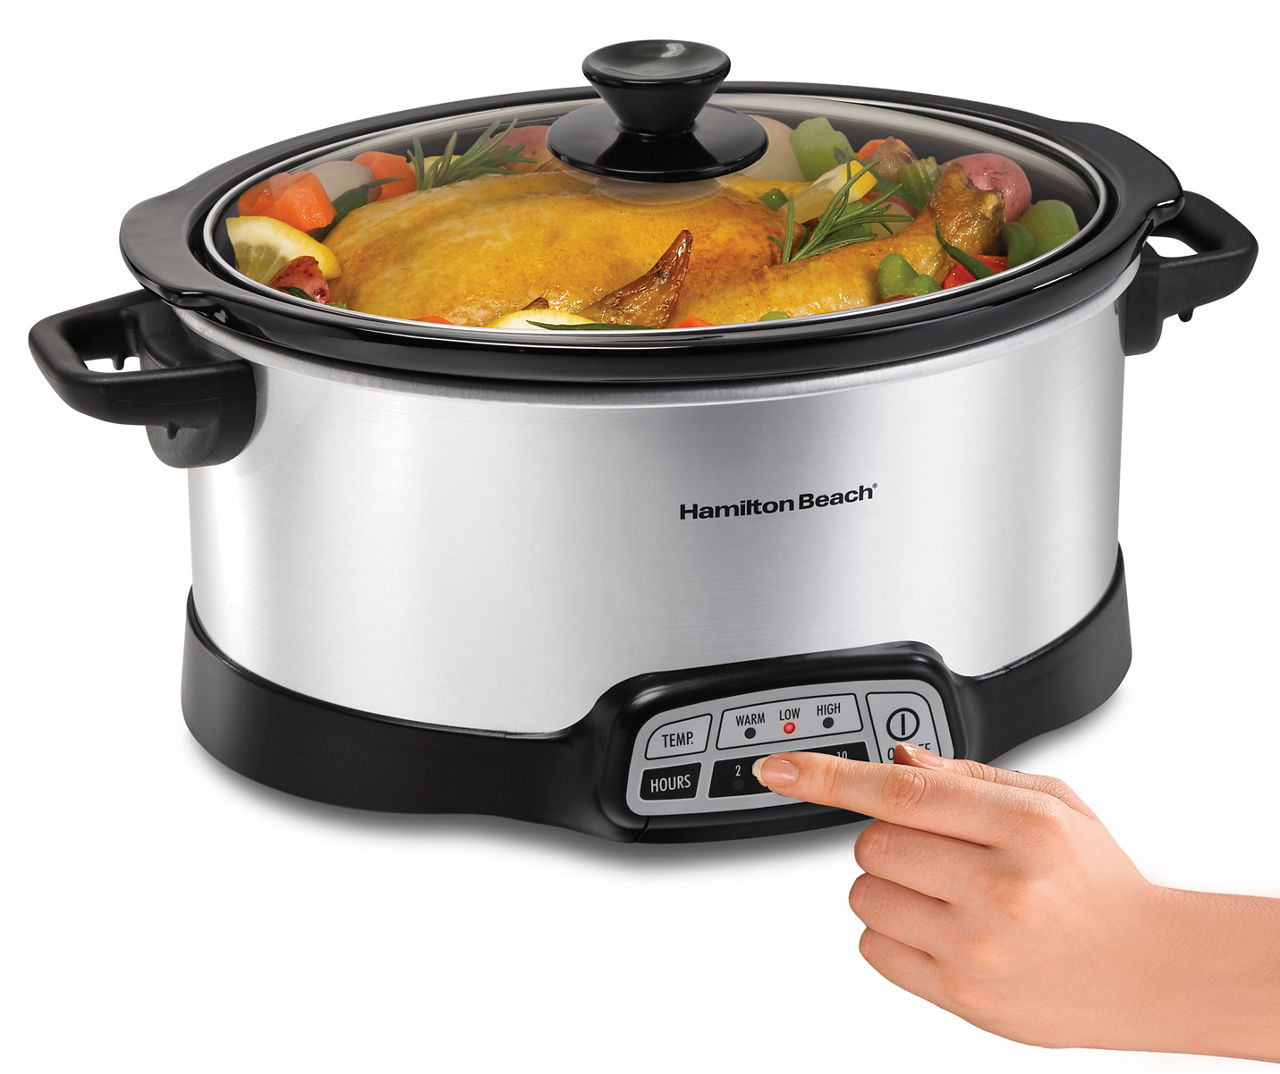 Hamilton Beach 6 Quart Oval Programmable Slow Cooker Review and